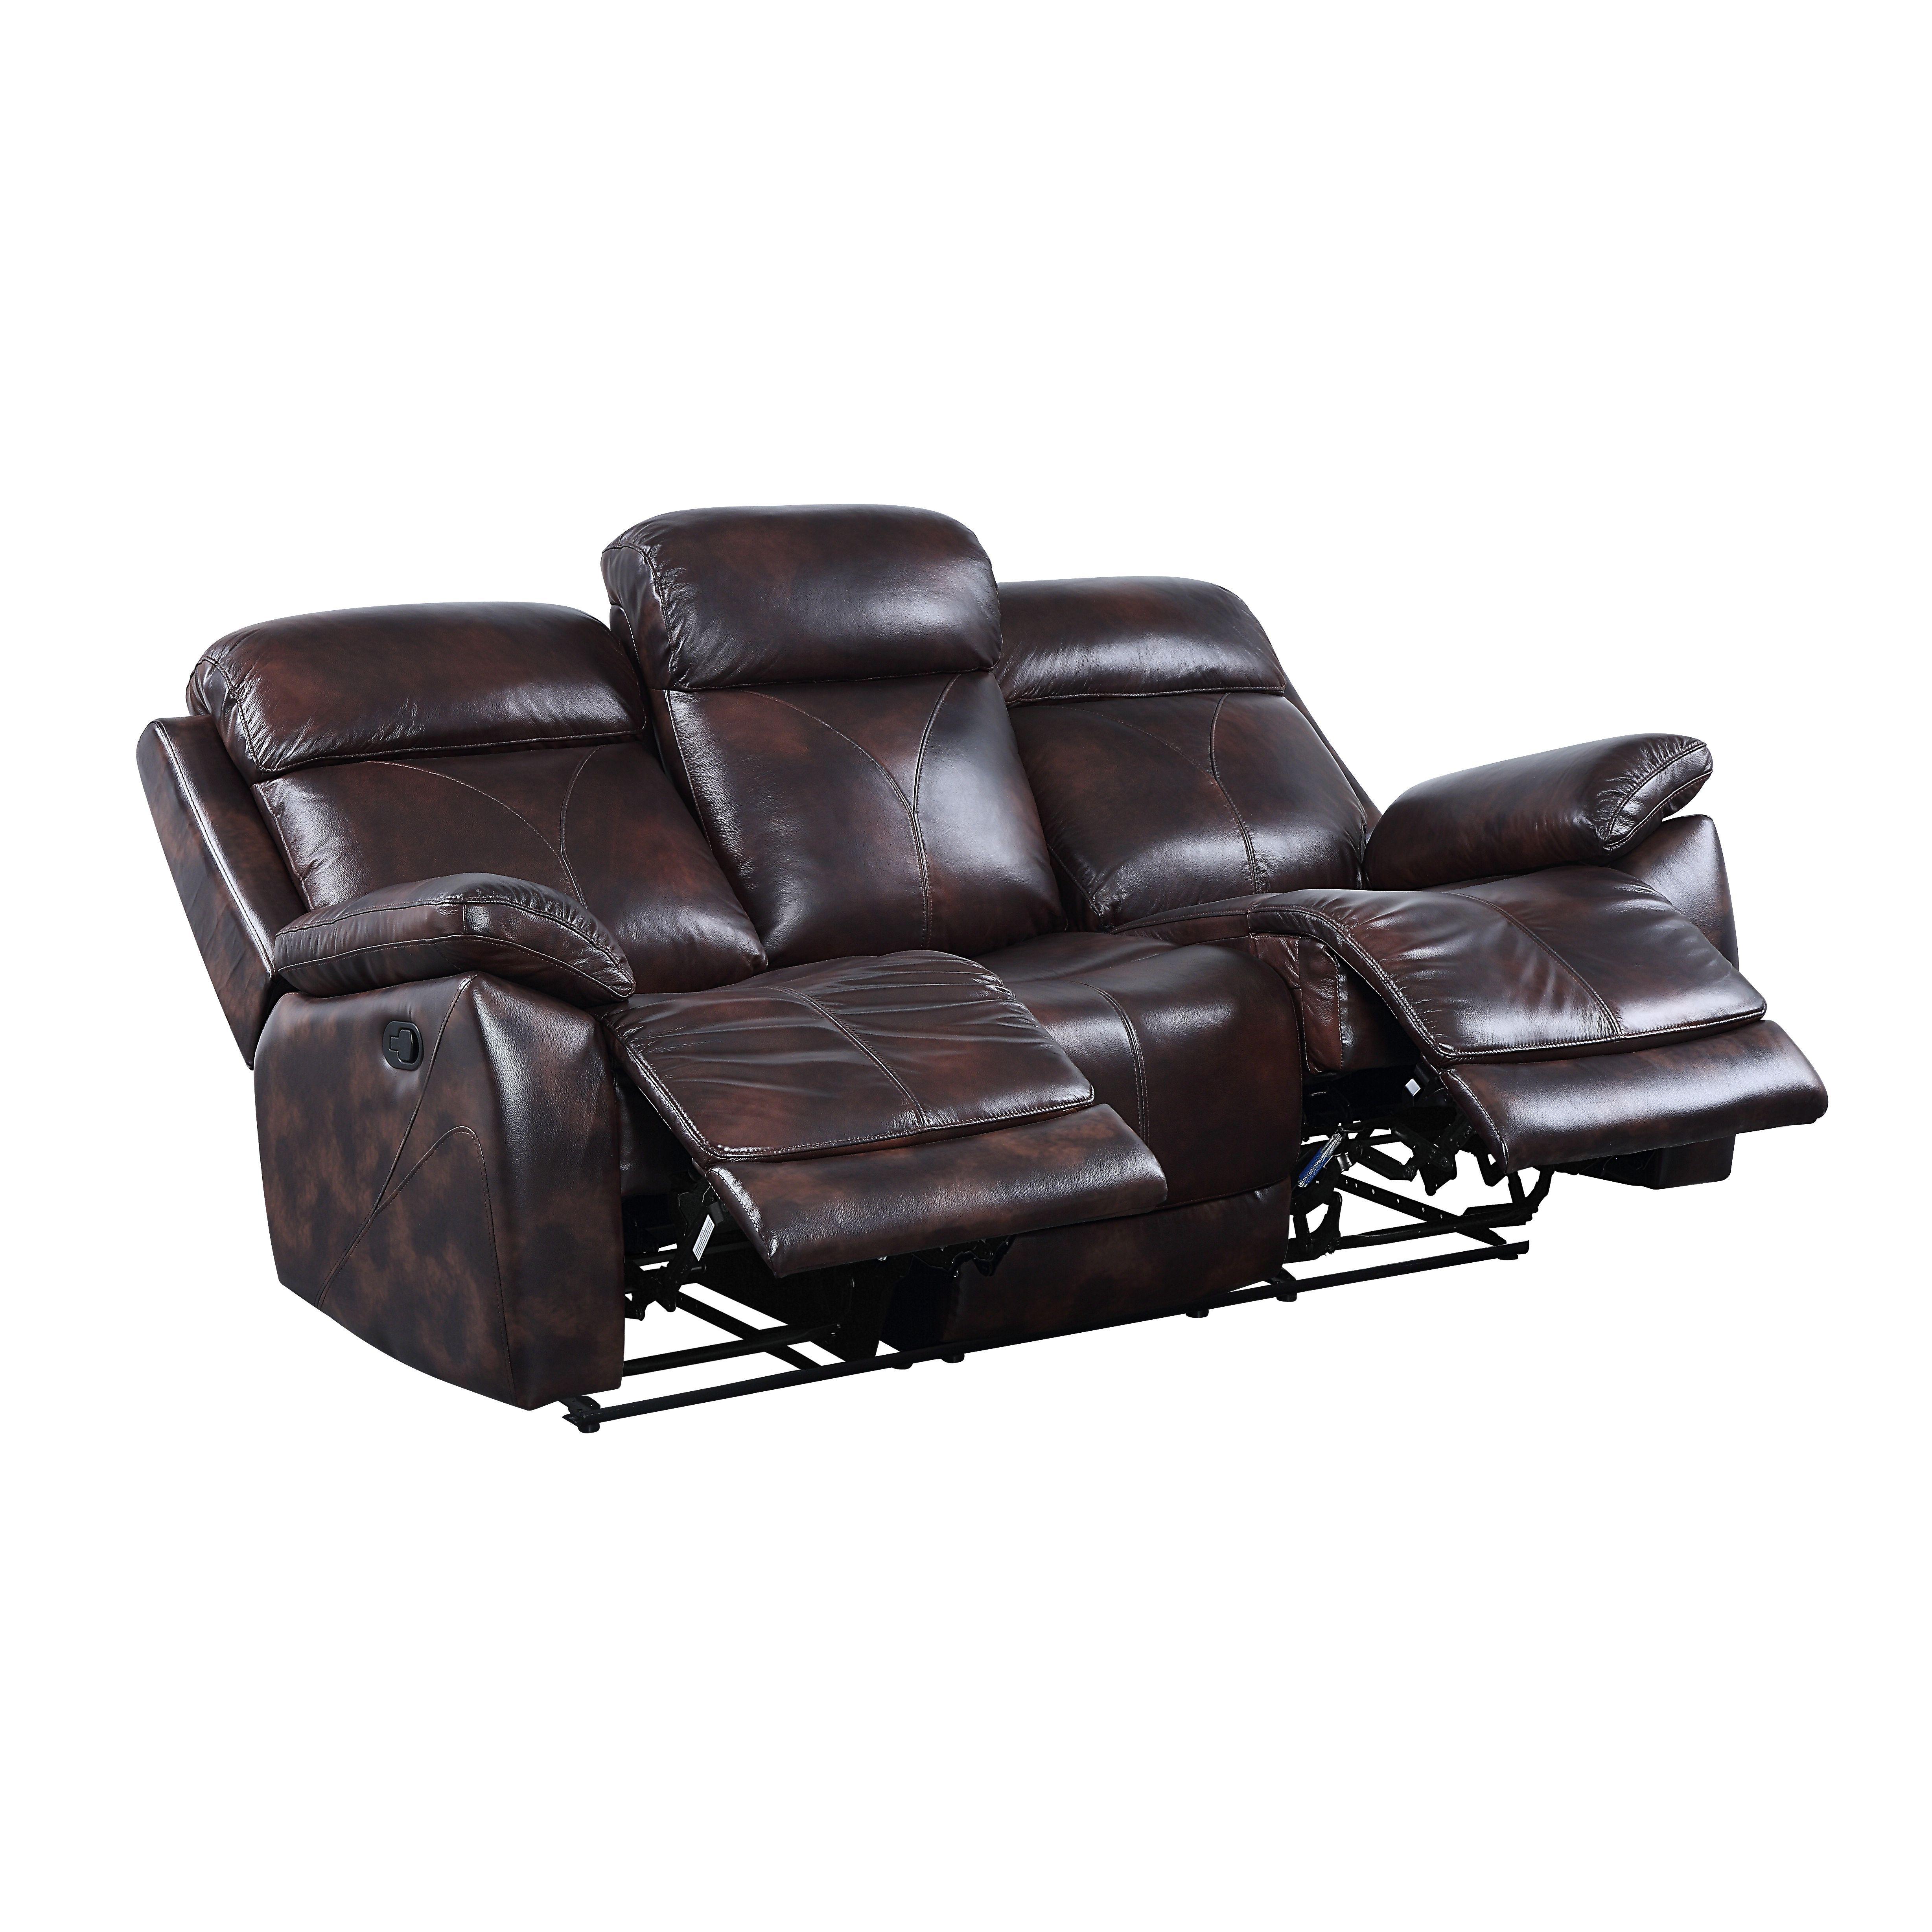 

    
Contemporary Dark Brown Leather Sofa by Acme Perfiel LV00066
